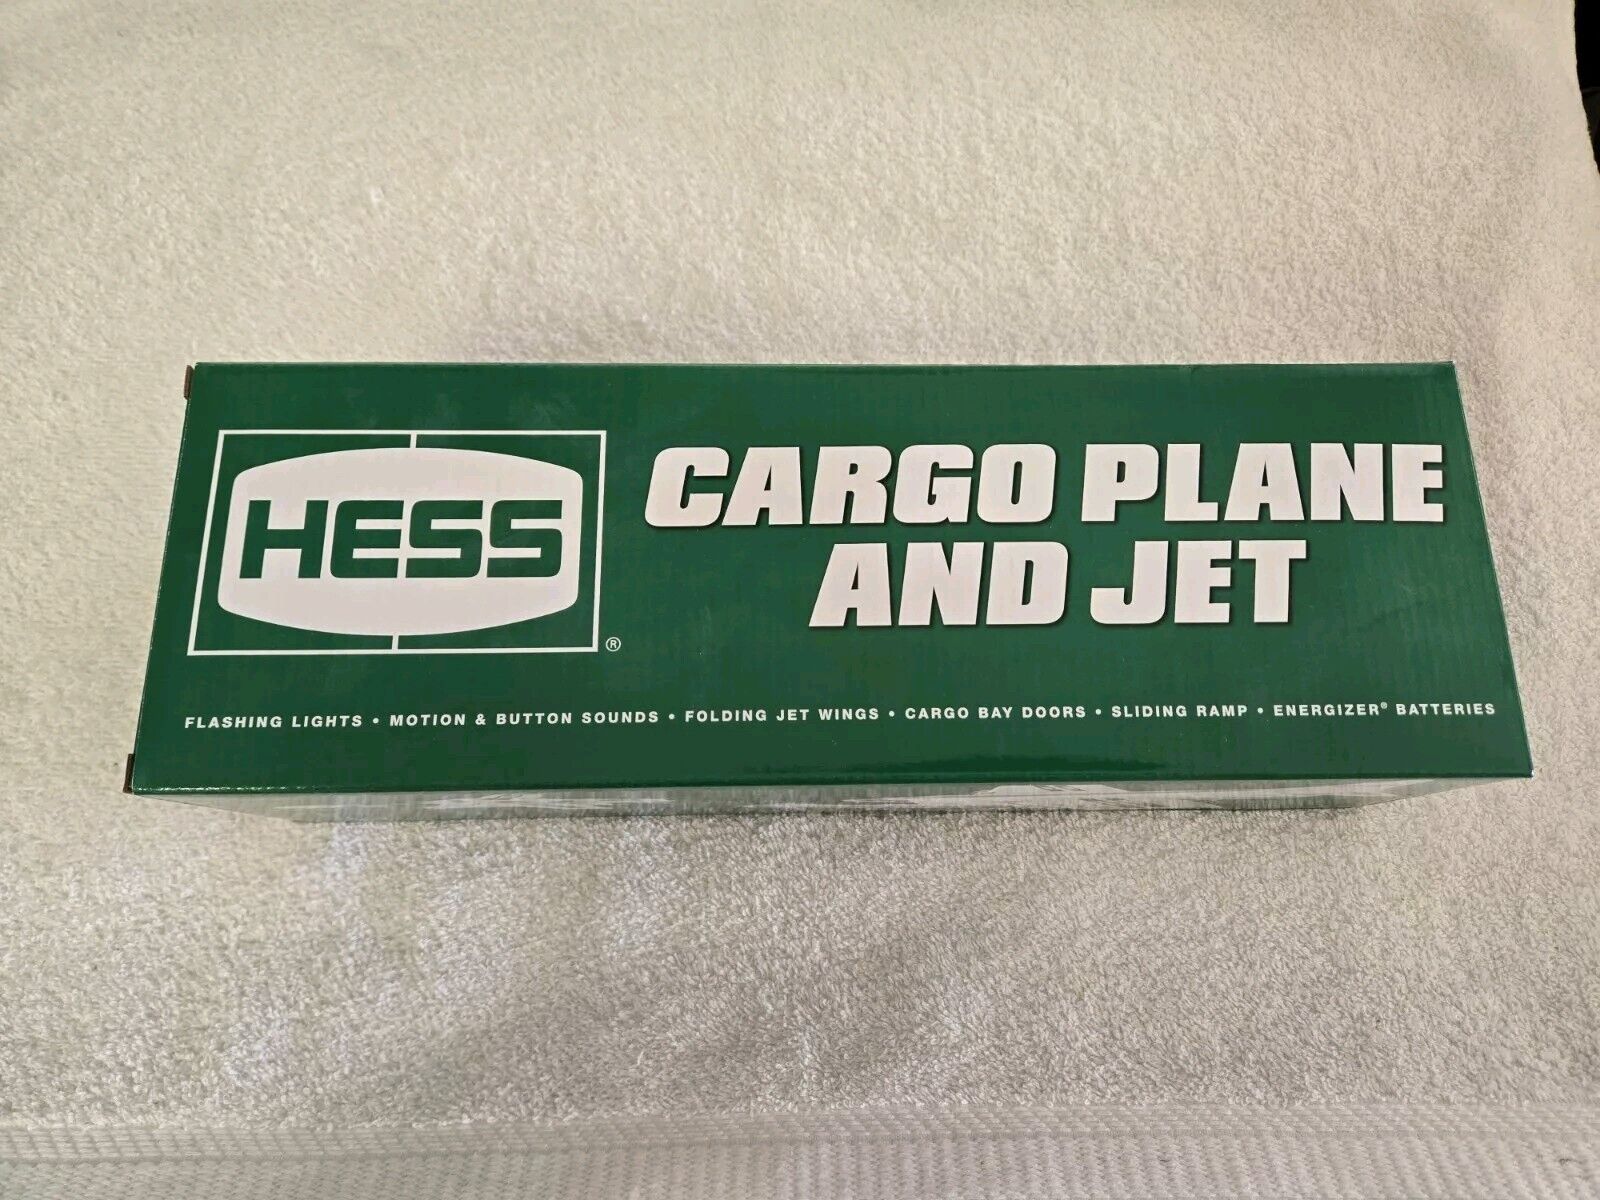 NEW 2021 HESS TRUCK COLLECTIBLE TOY CARGO PLANE AND JET WITH LED LIGHTS & SOUND